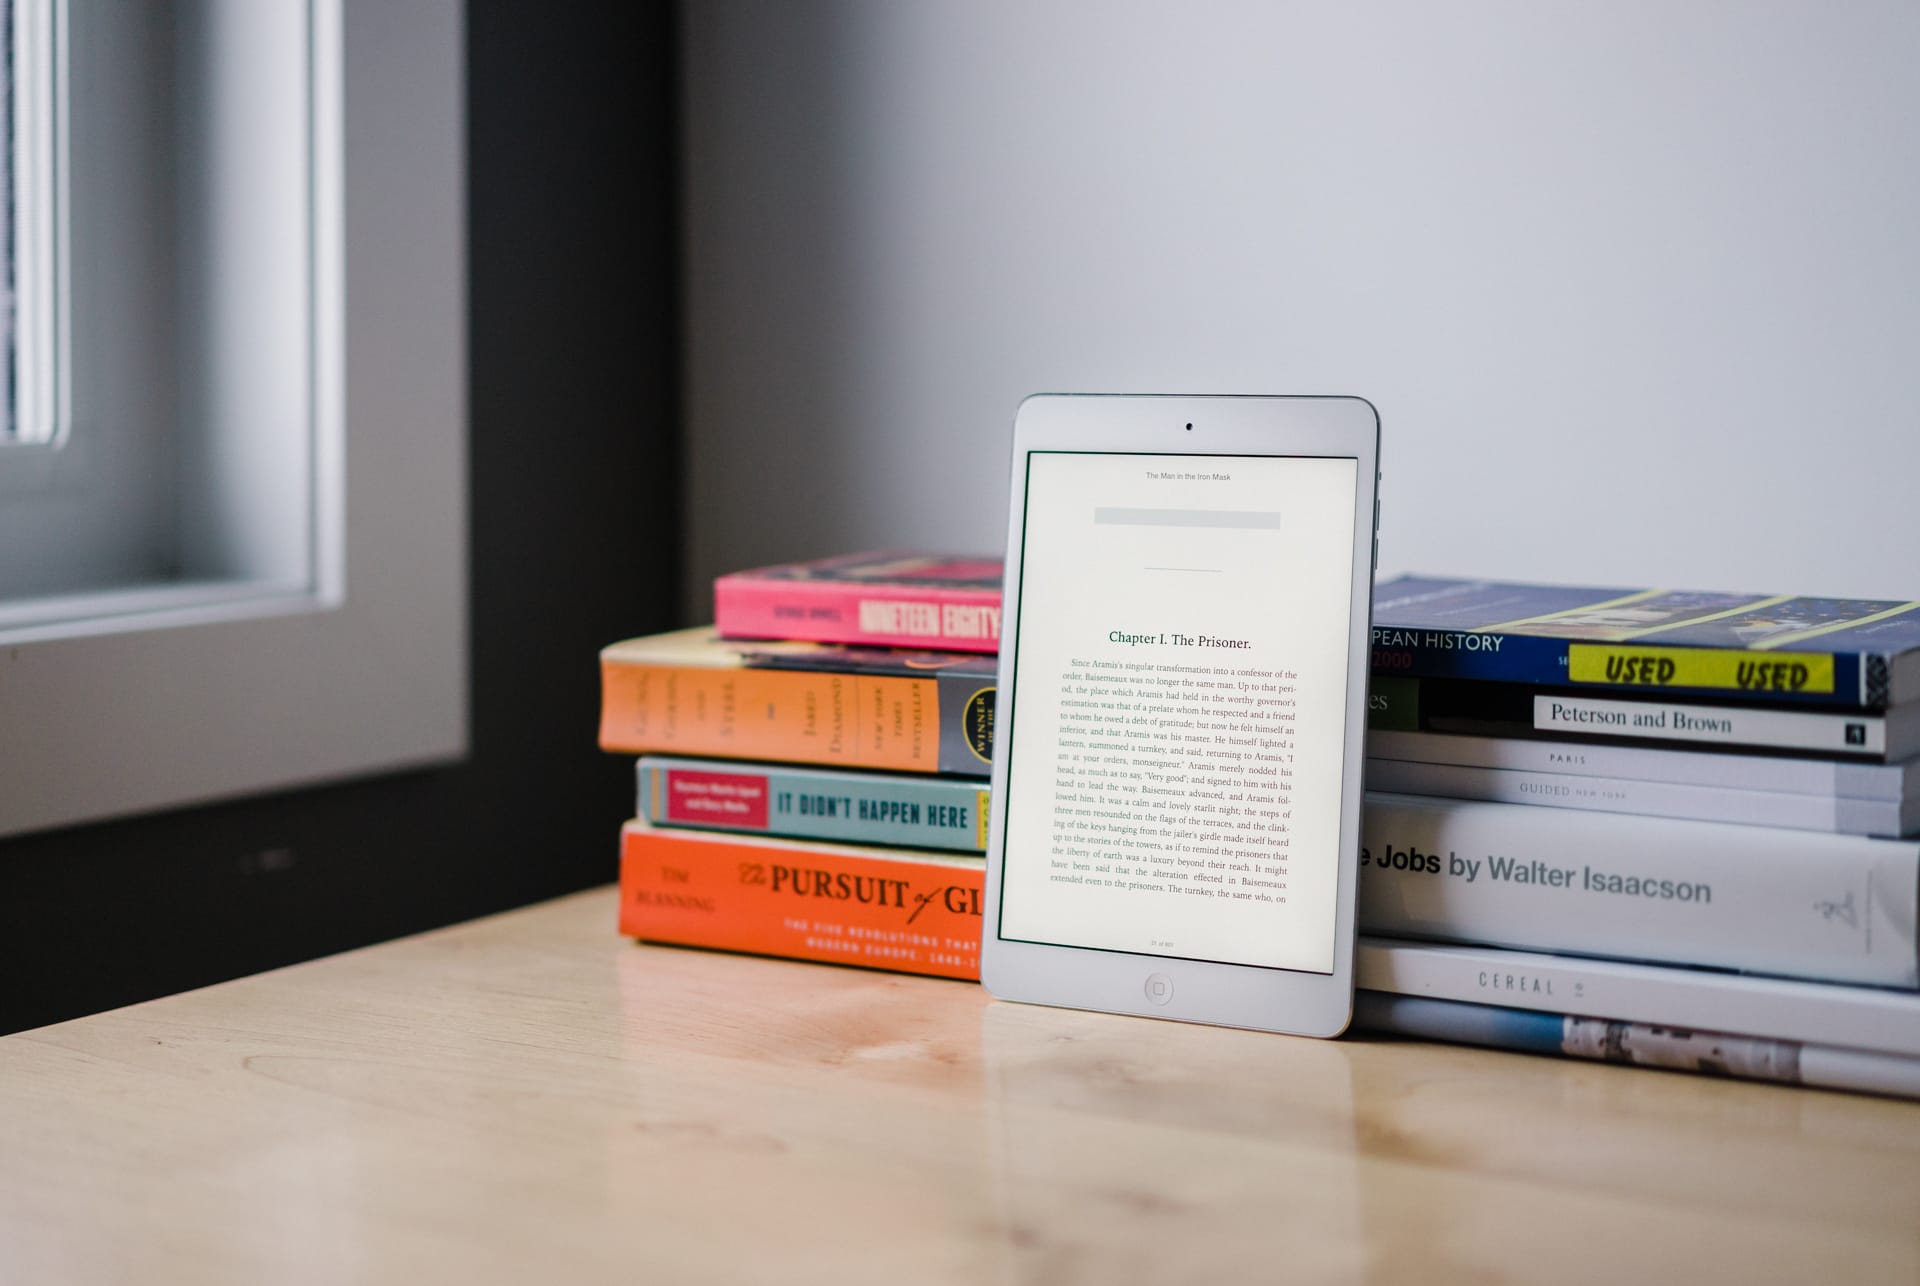 The best app for reading e-books on iOS